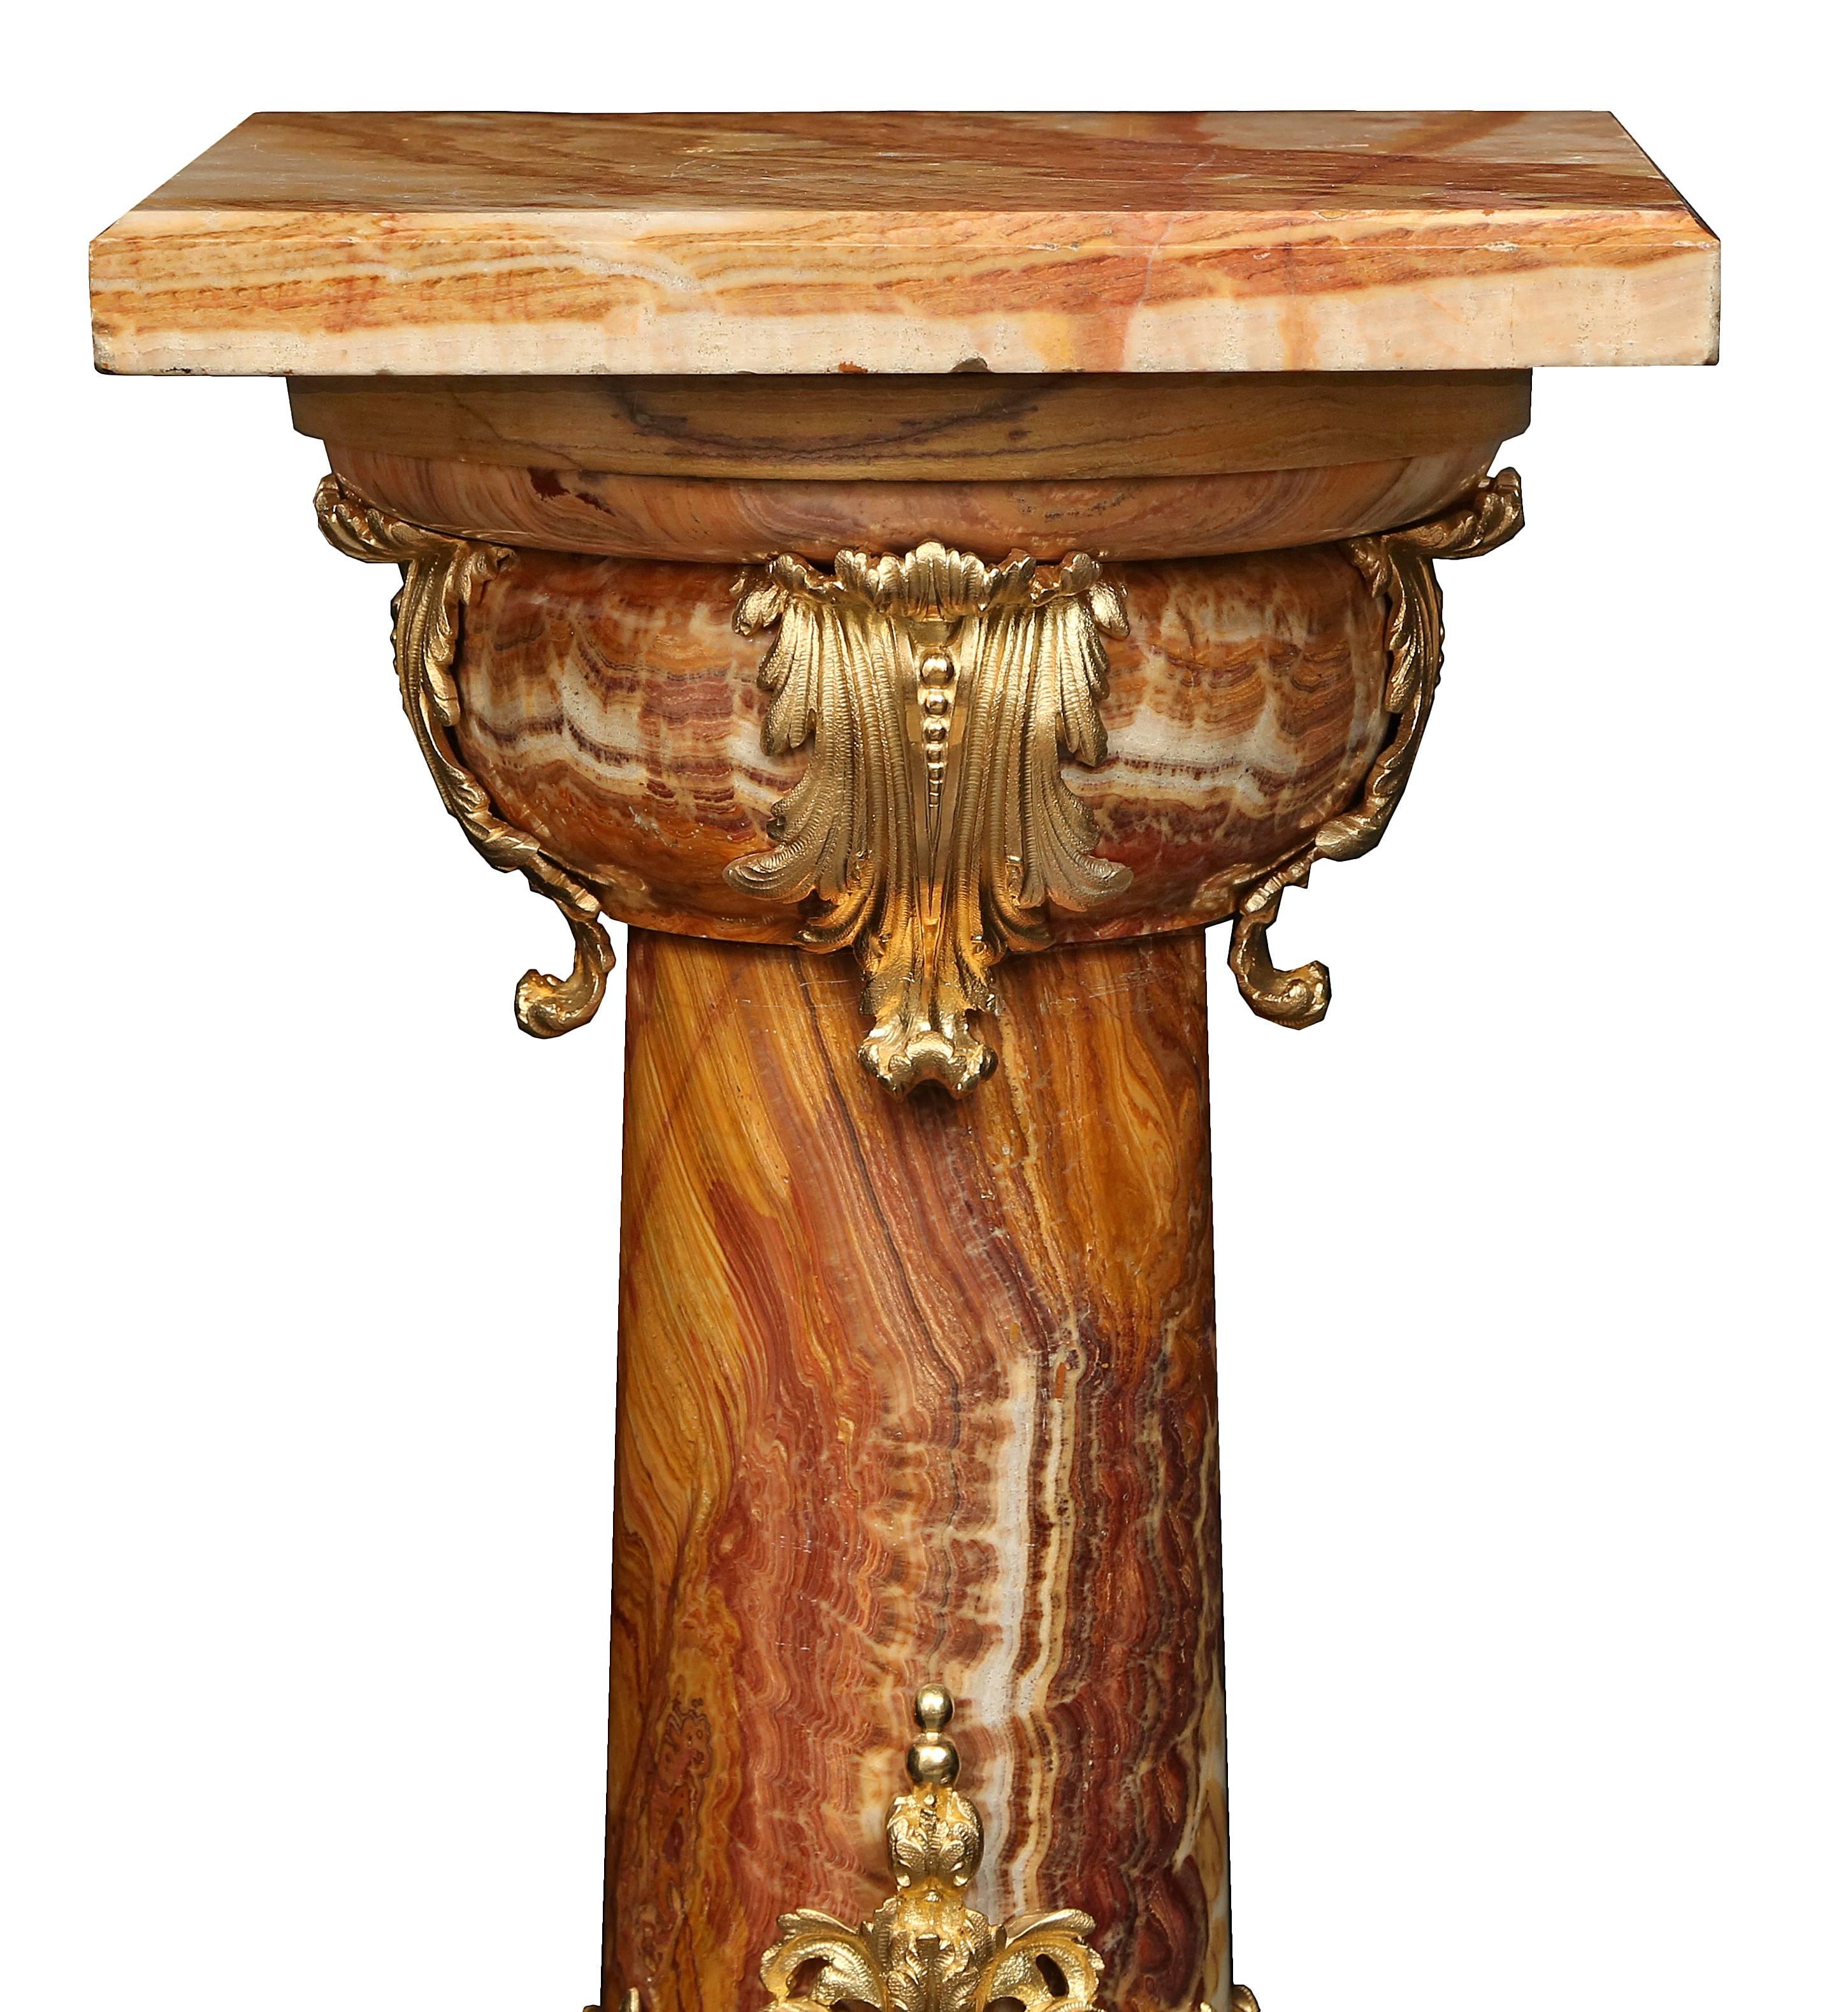 French 19th Century Belle Époque Period Onyx and Ormolu-Mounted Pedestals 1